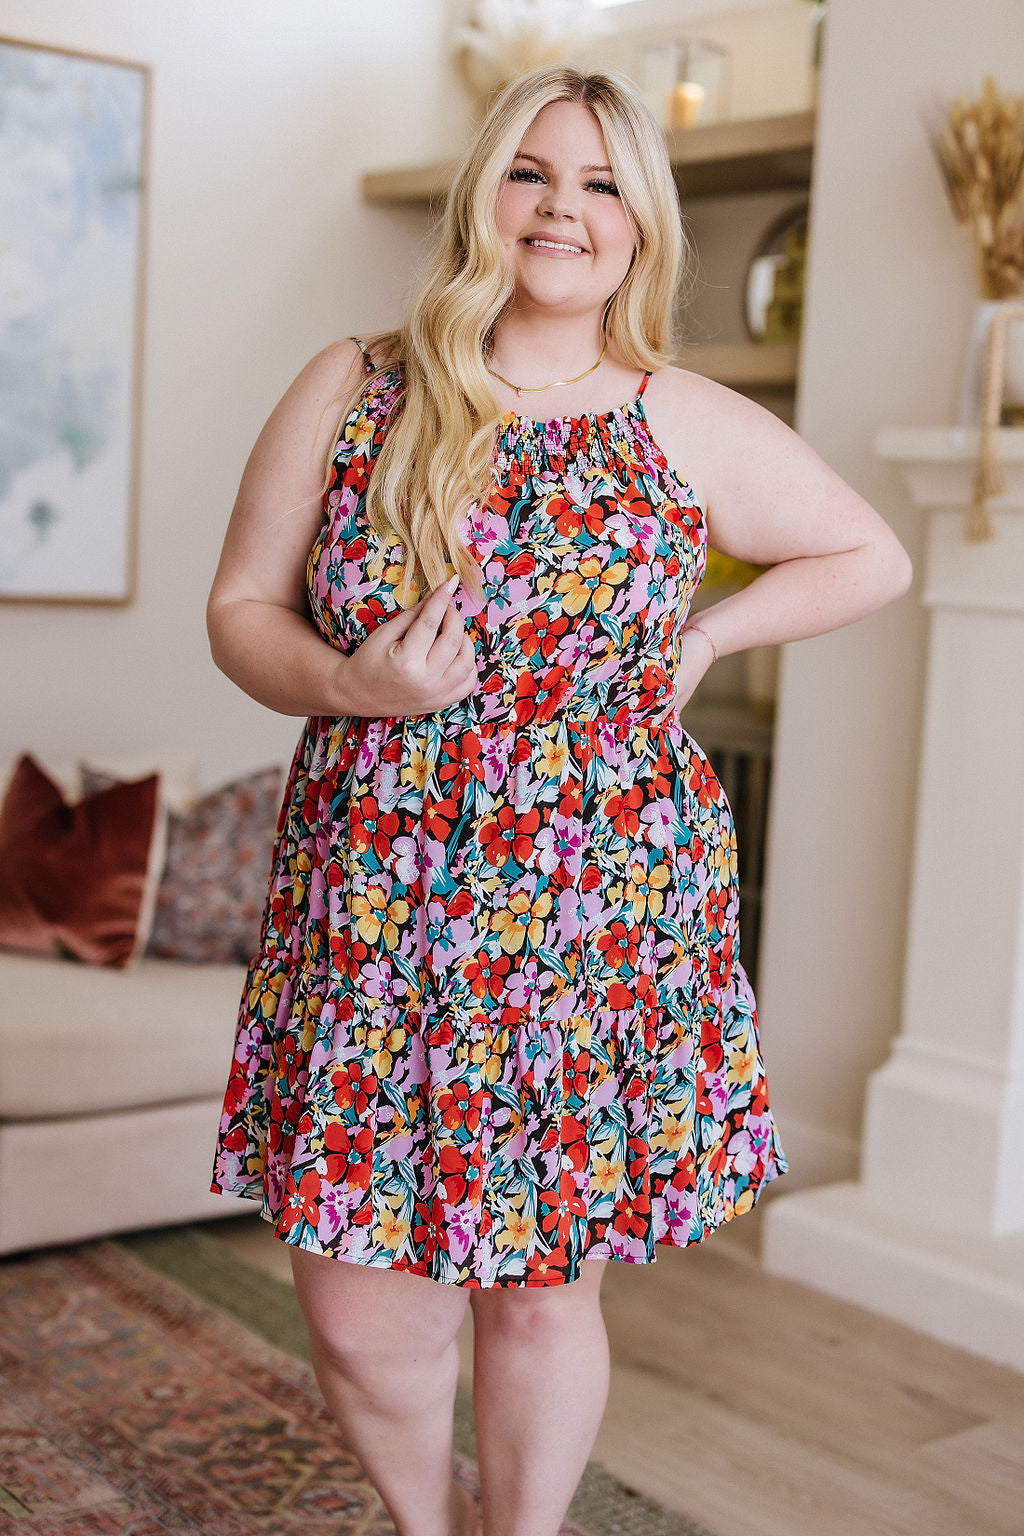 DOORBUSTER: My Side of the Story Floral Dress (Ships in 1-2 Weeks)